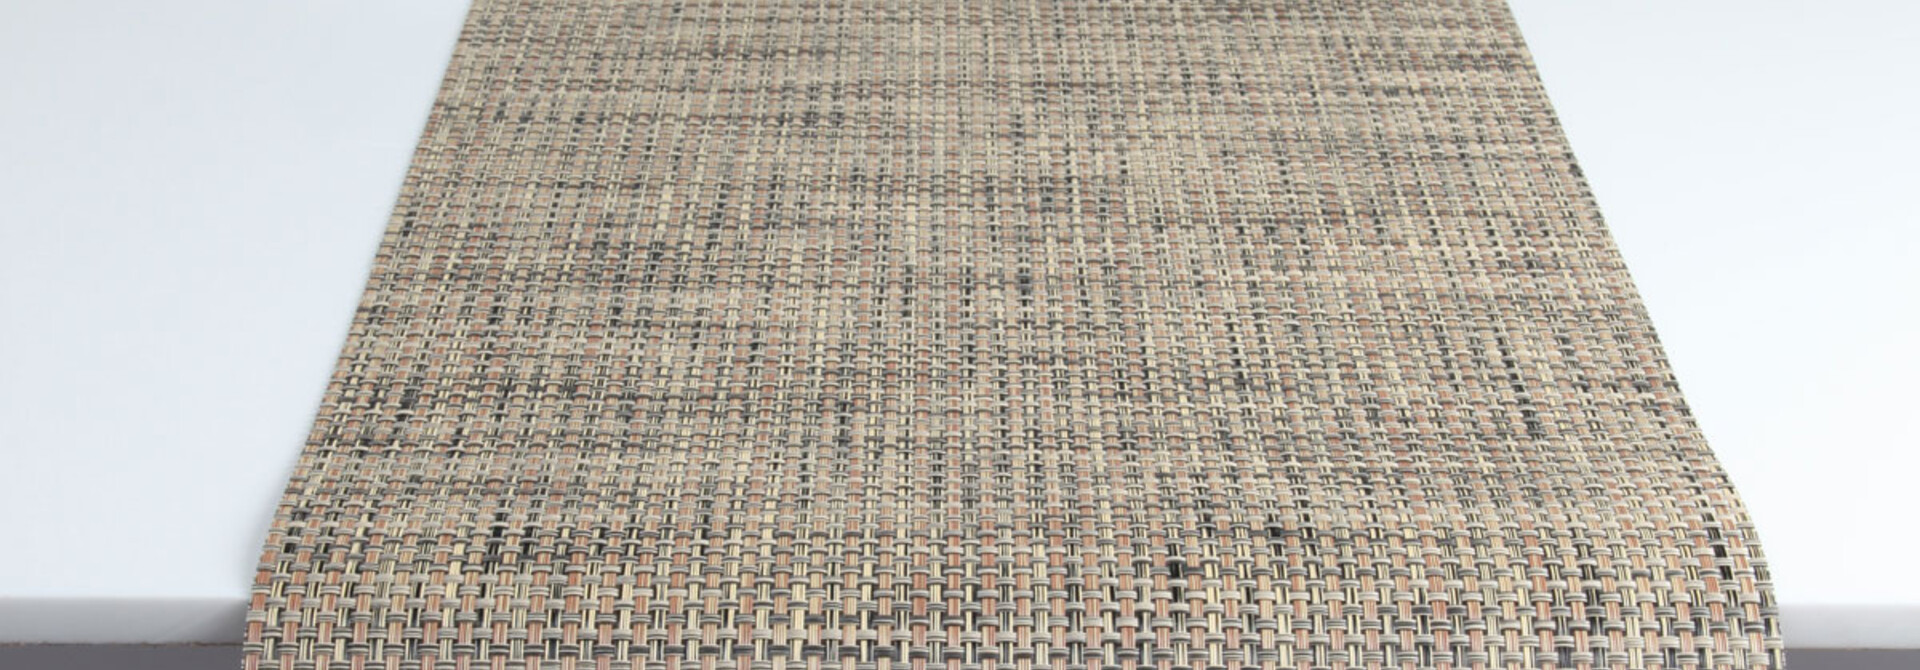 Basketweave | The Table Runner Collection -  14 Inch x 72 Inch